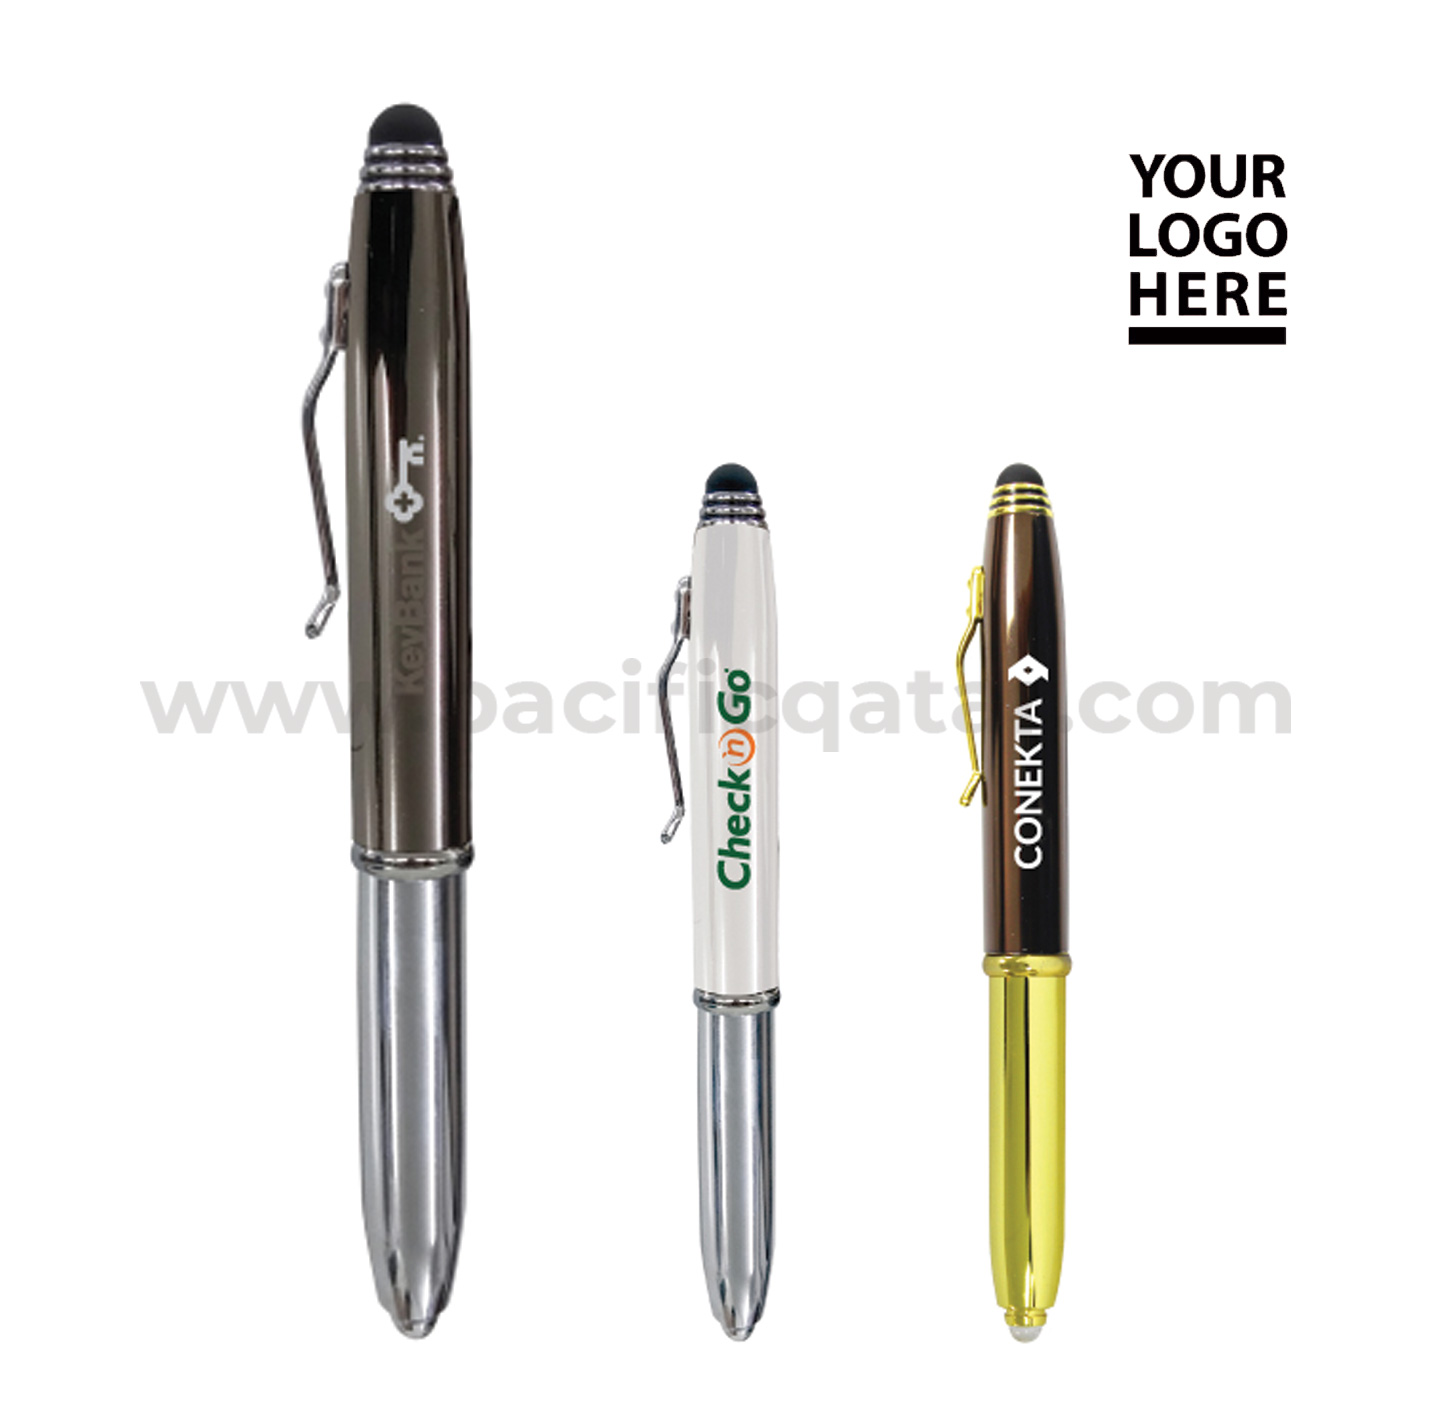 3 in 1 Metal Pens with Stylus & Light